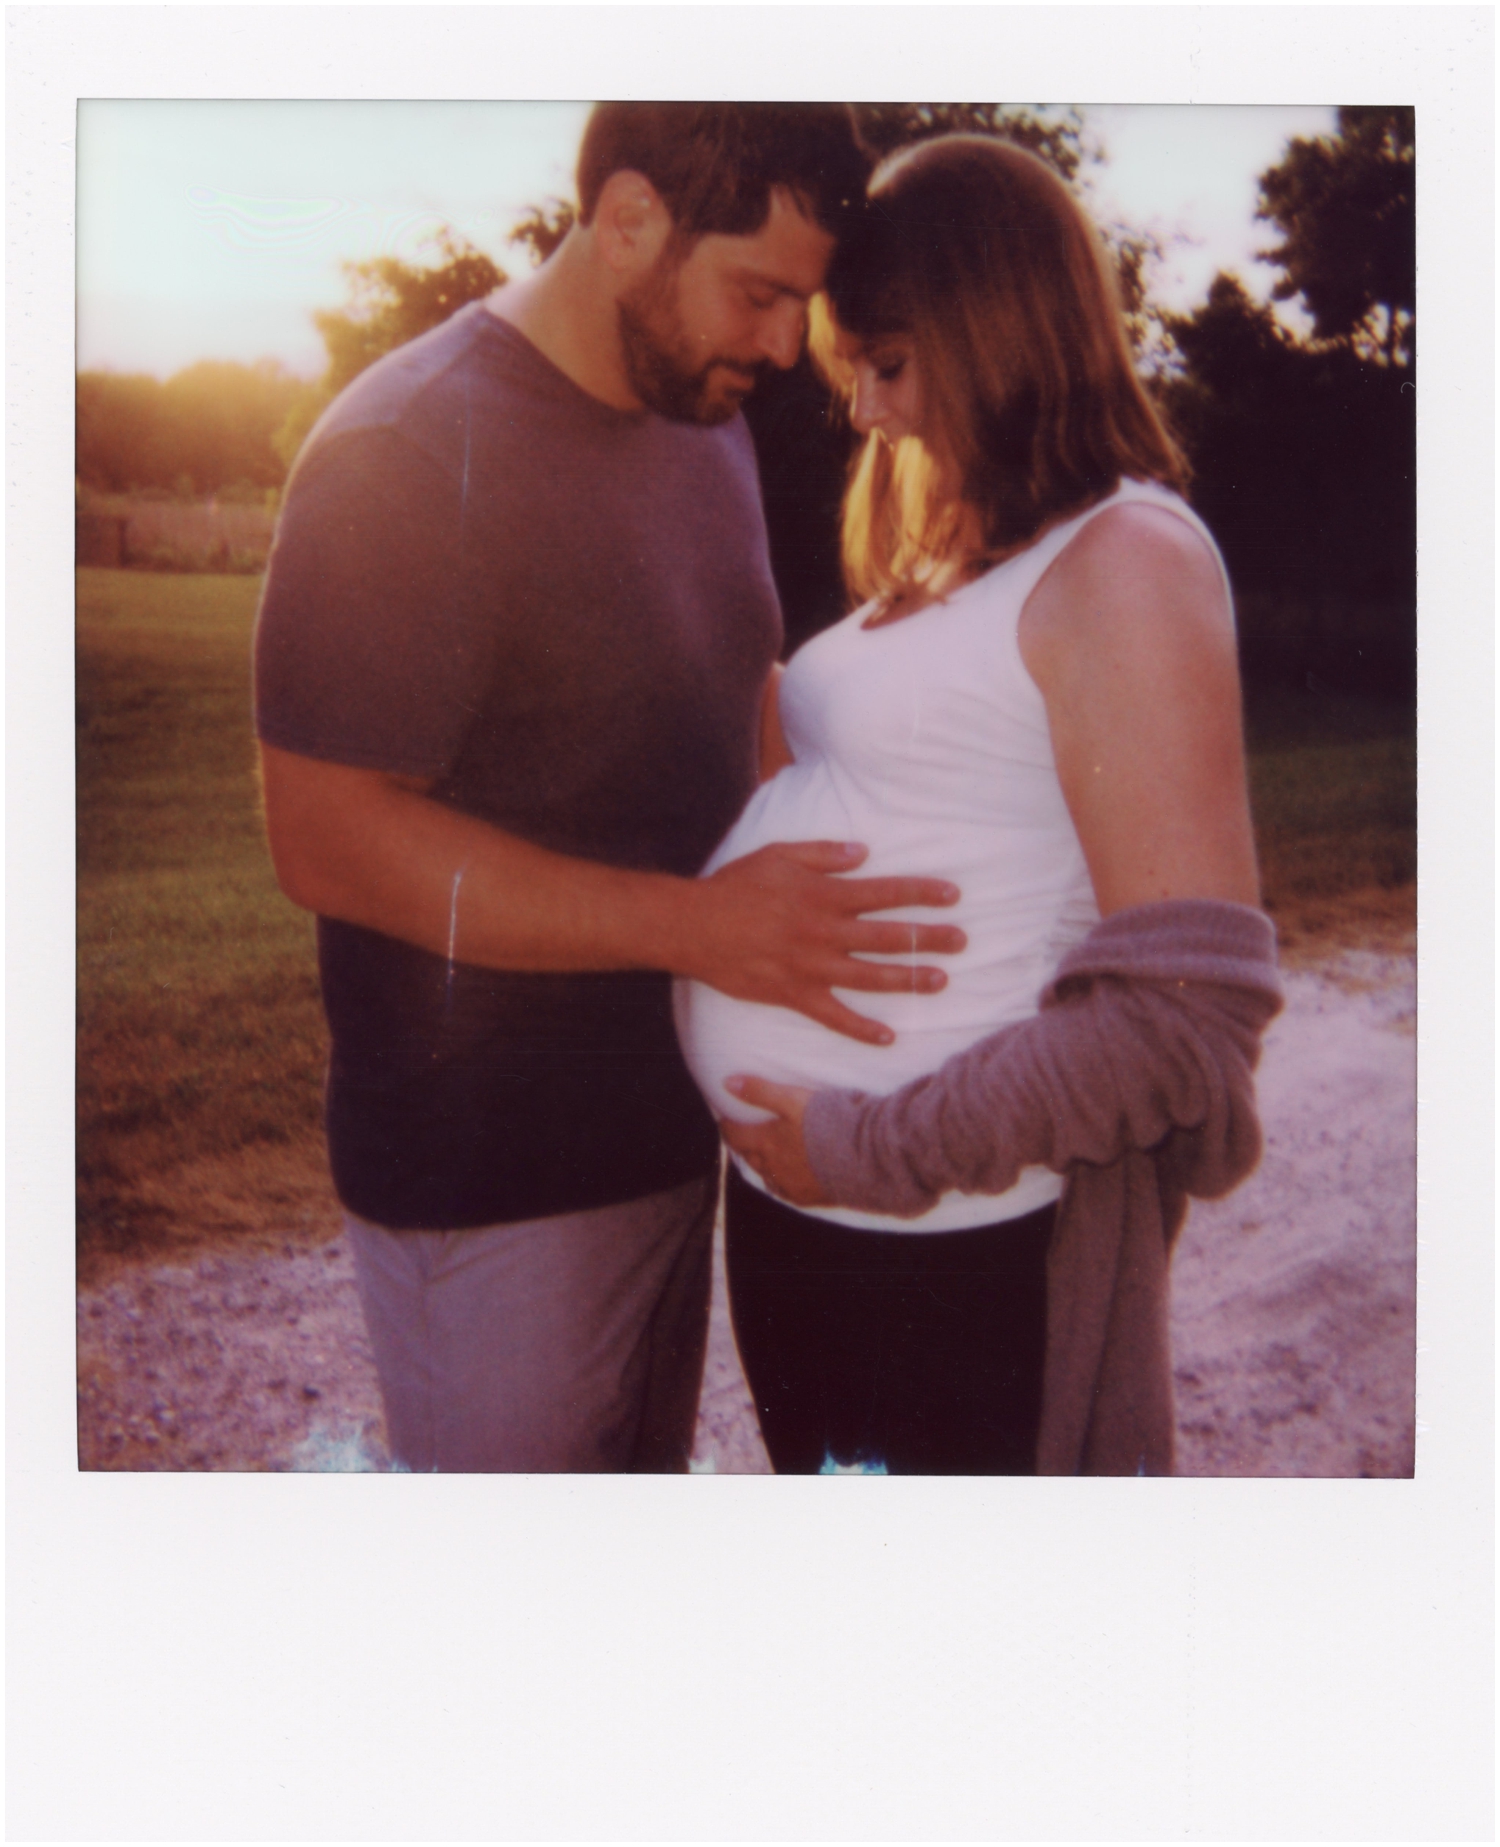 Andrew puts his hand on Stephanie's stomach in a Polaroid maternity photo.